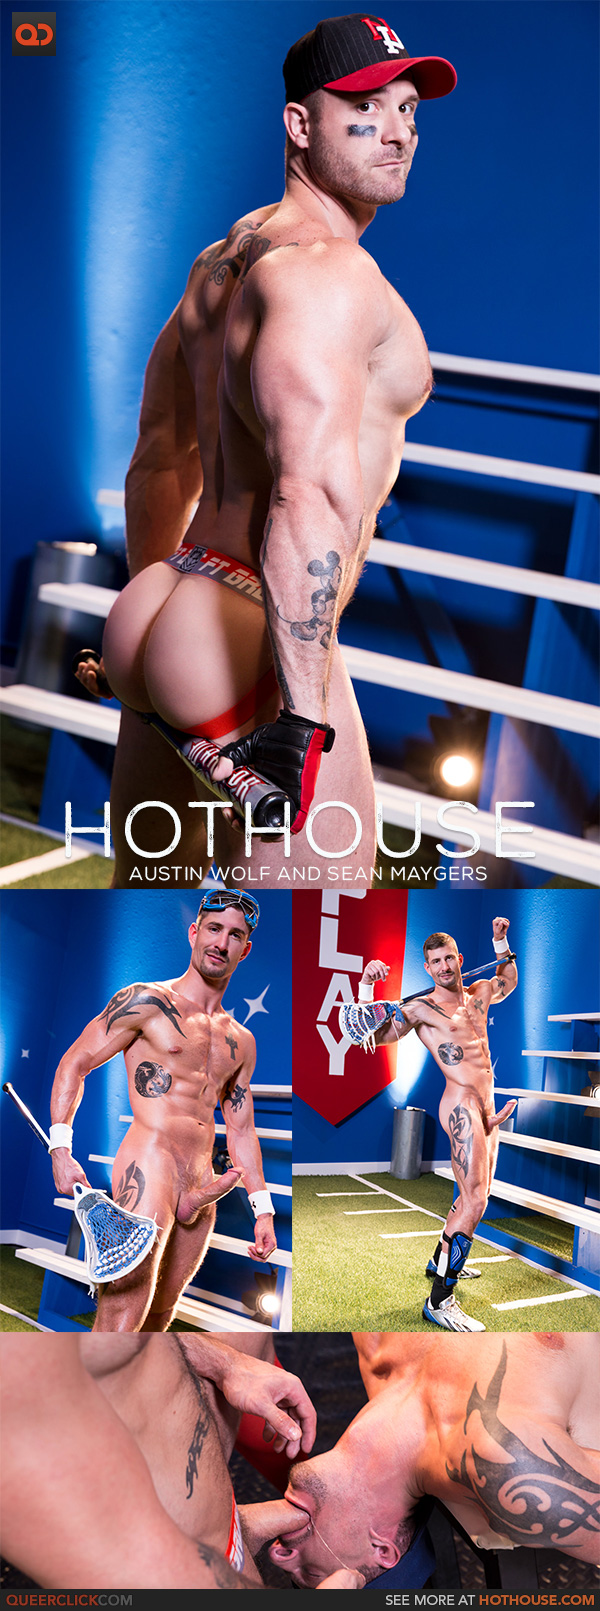 Hot House: Austin Wolf and Sean Maygers